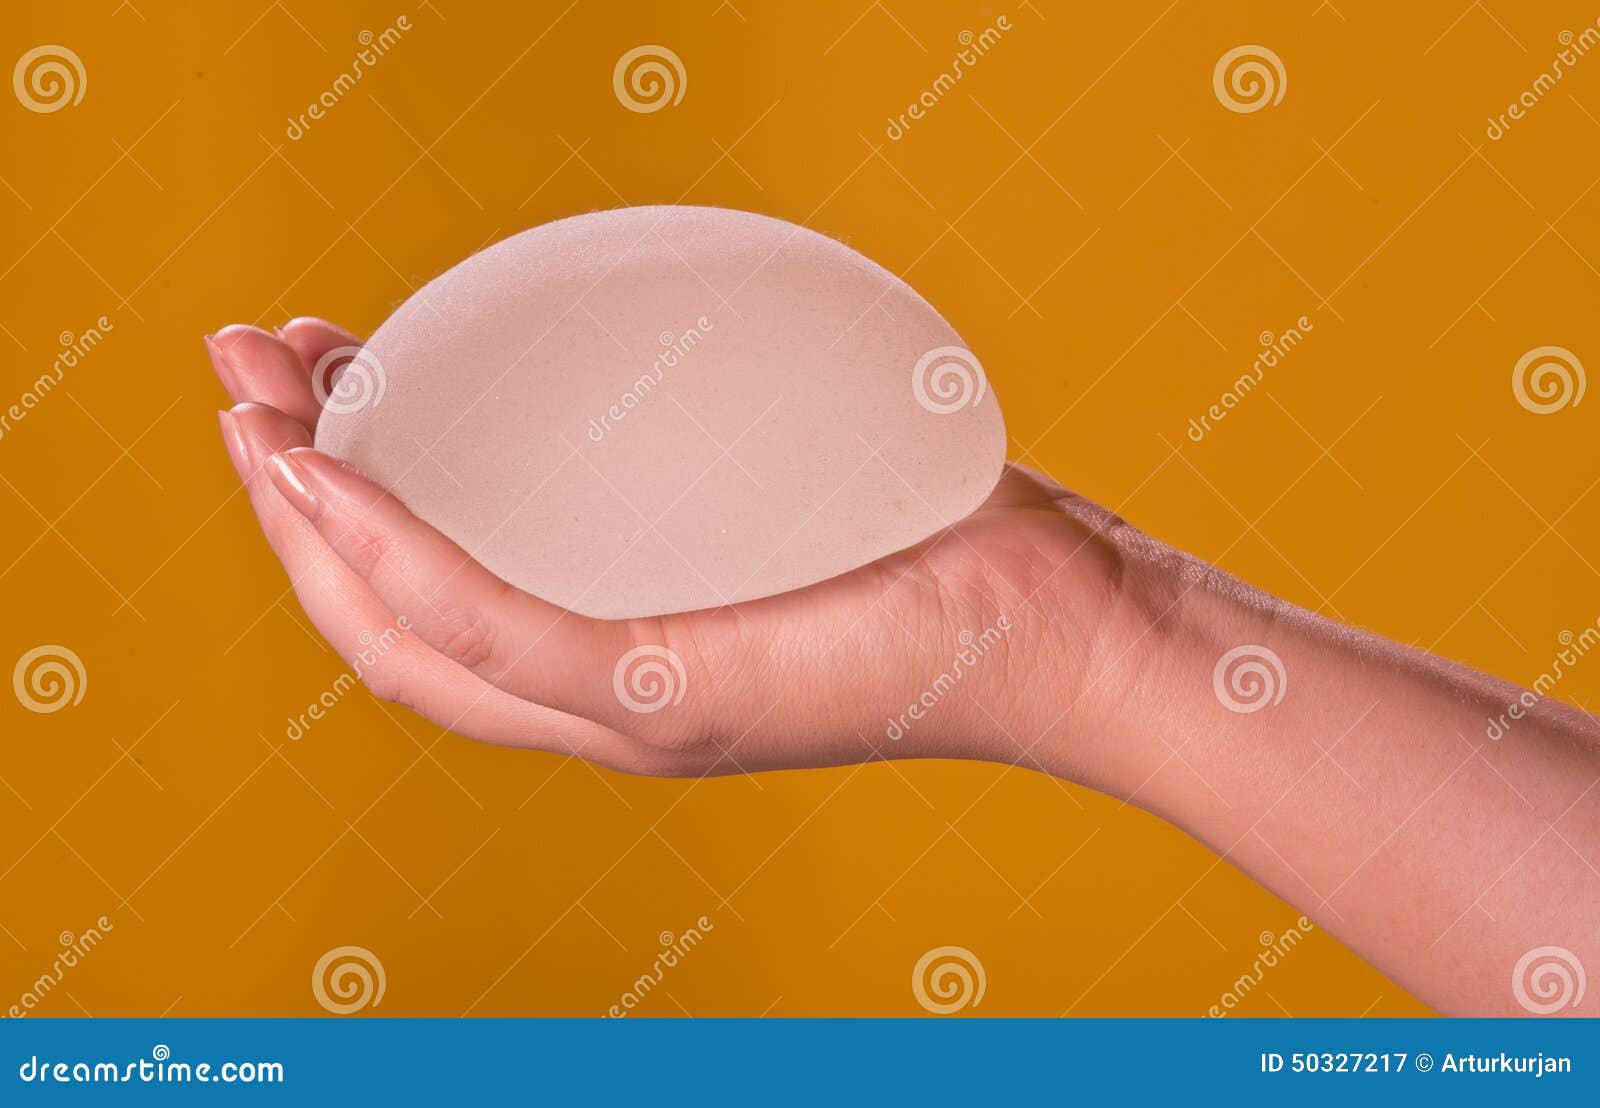 silicone implants on hand